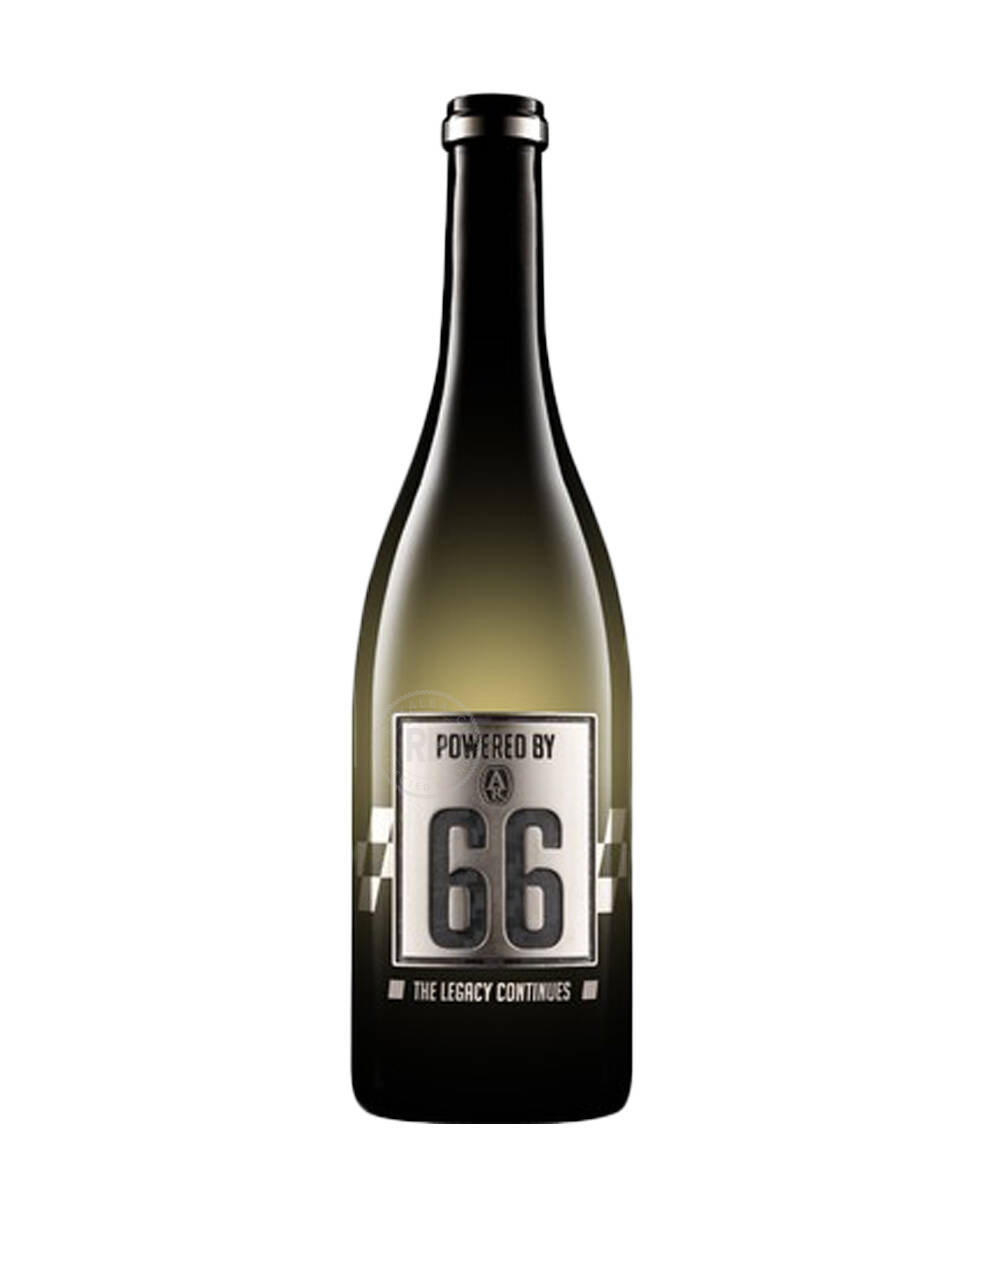 Adobe Road 66 The Legacy Continues Wine